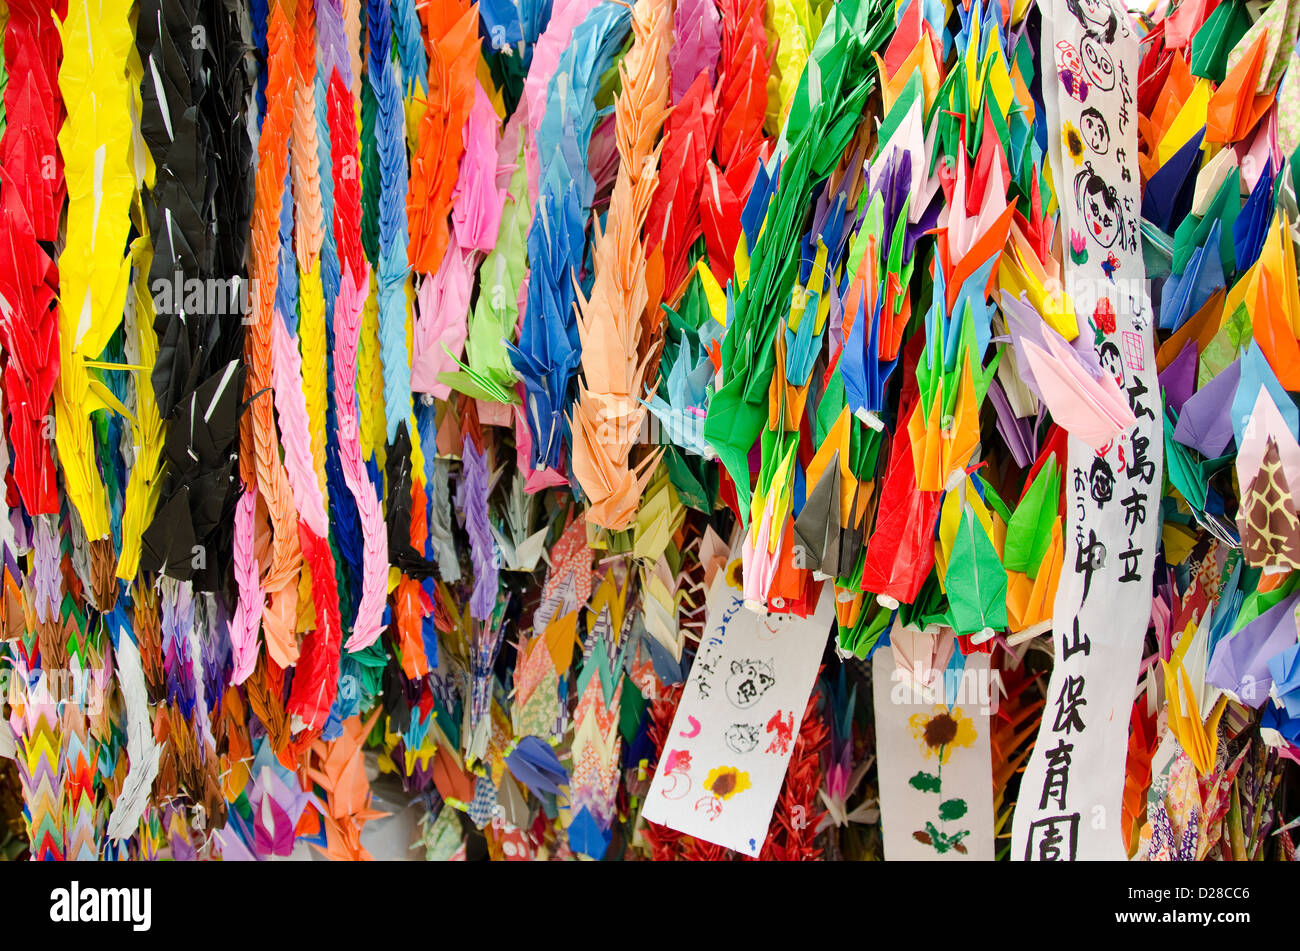 Thousand origami cranes at the children's peace monument in Hiroshima, Japan Stock Photo